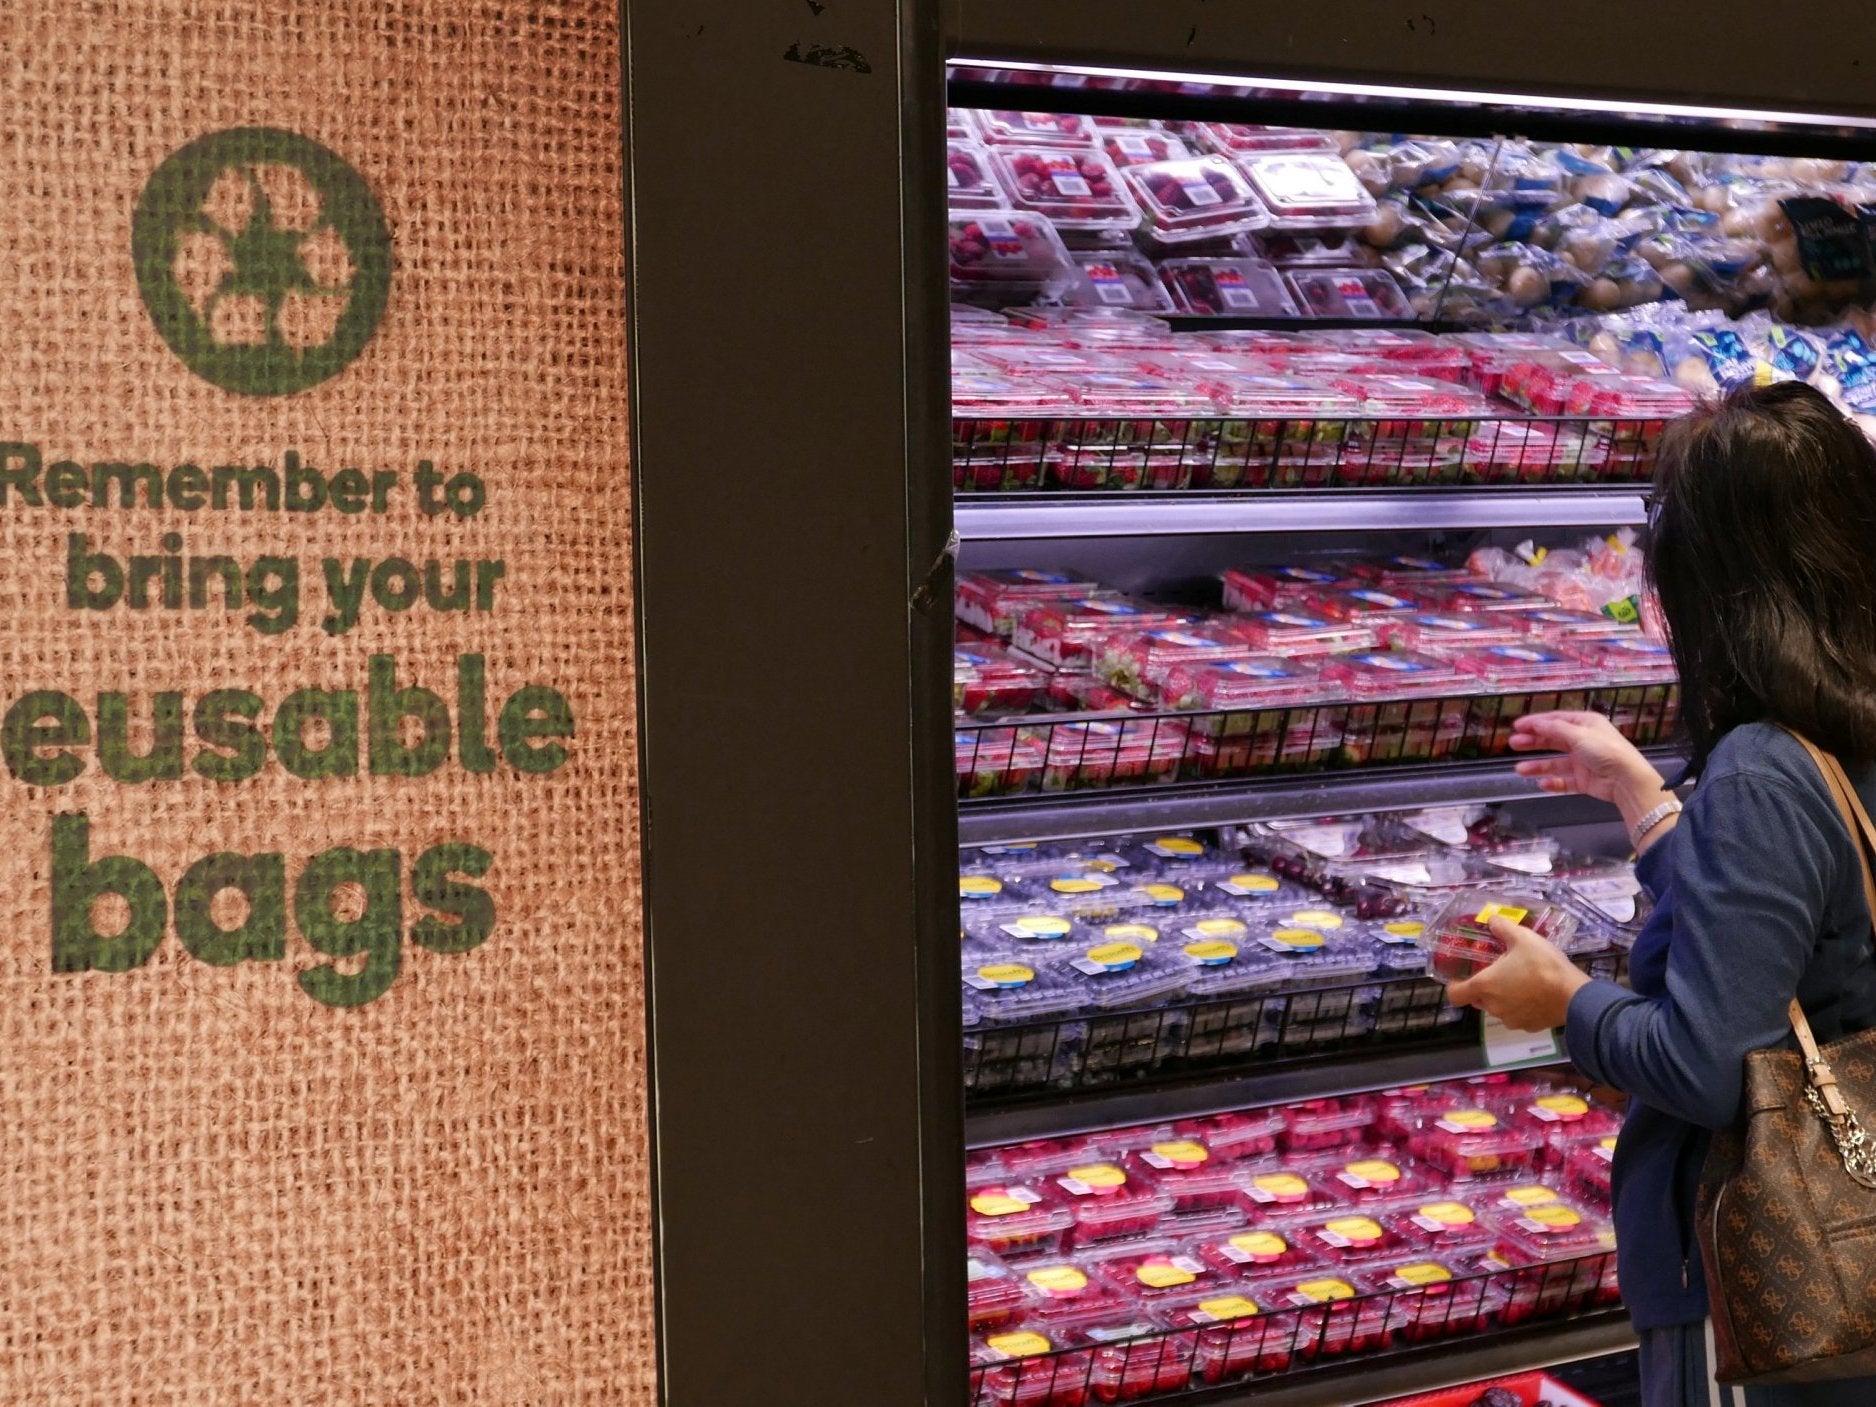 Supermarket shoppers are encouraged to bring their own bags